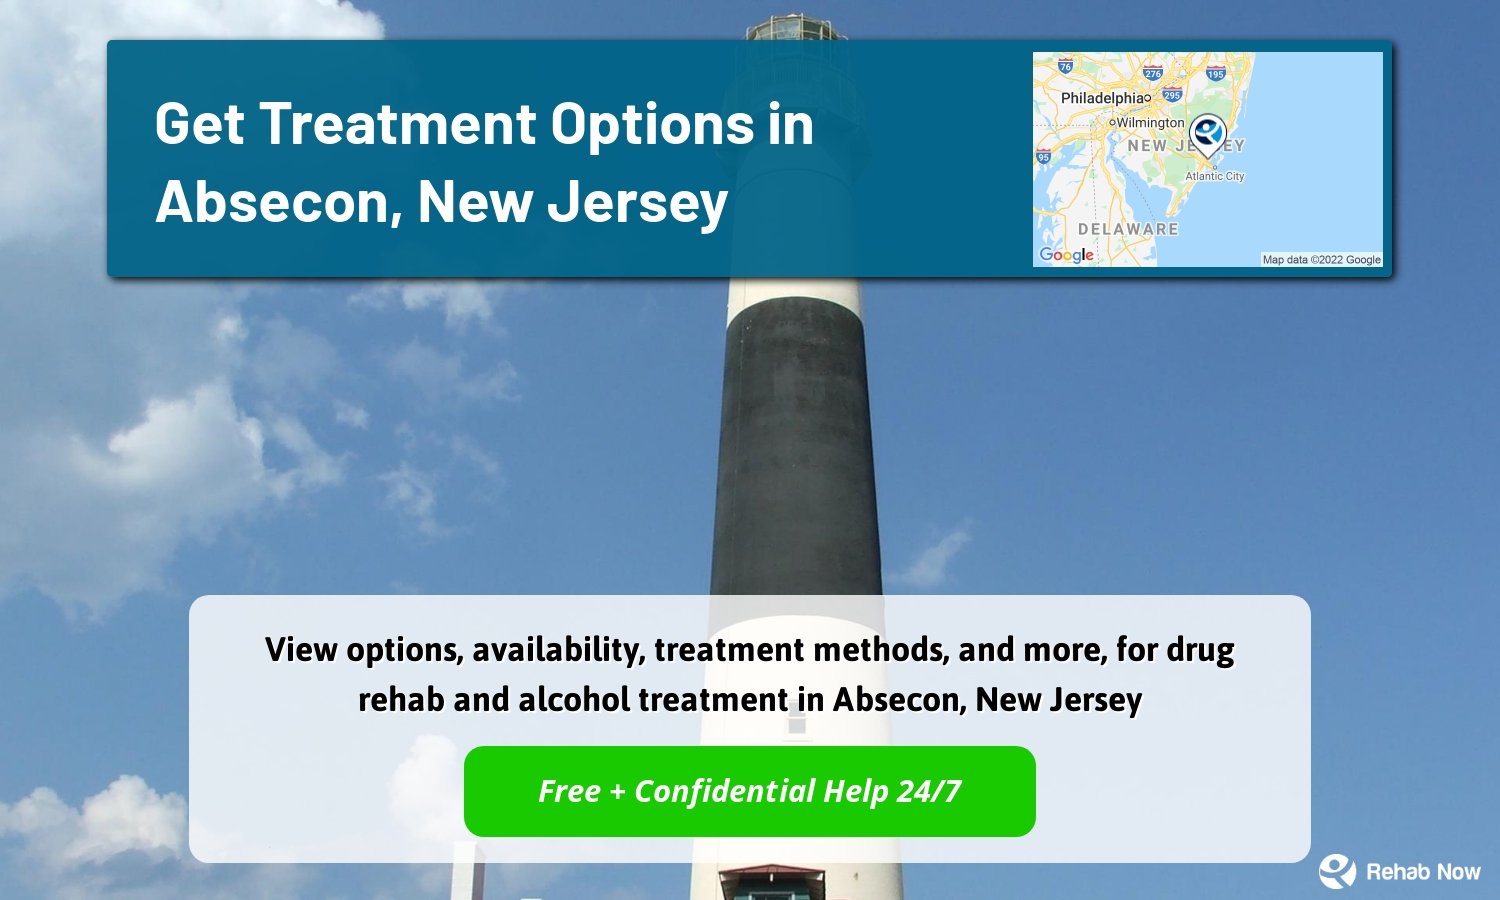 View options, availability, treatment methods, and more, for drug rehab and alcohol treatment in Absecon, New Jersey